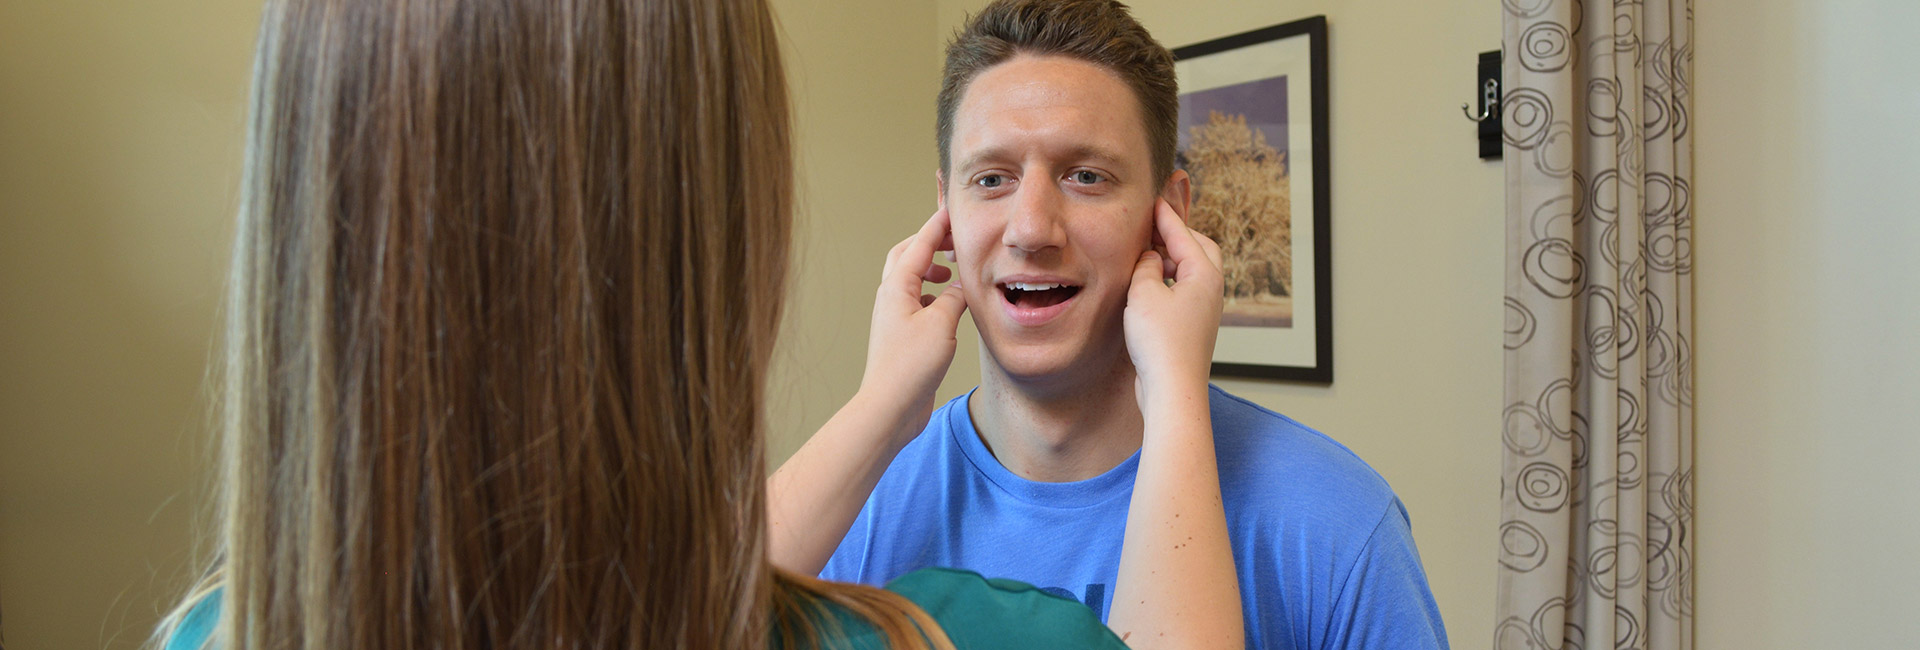 A physical therapist specializing in myofunctional therapy works on a patient's jaw